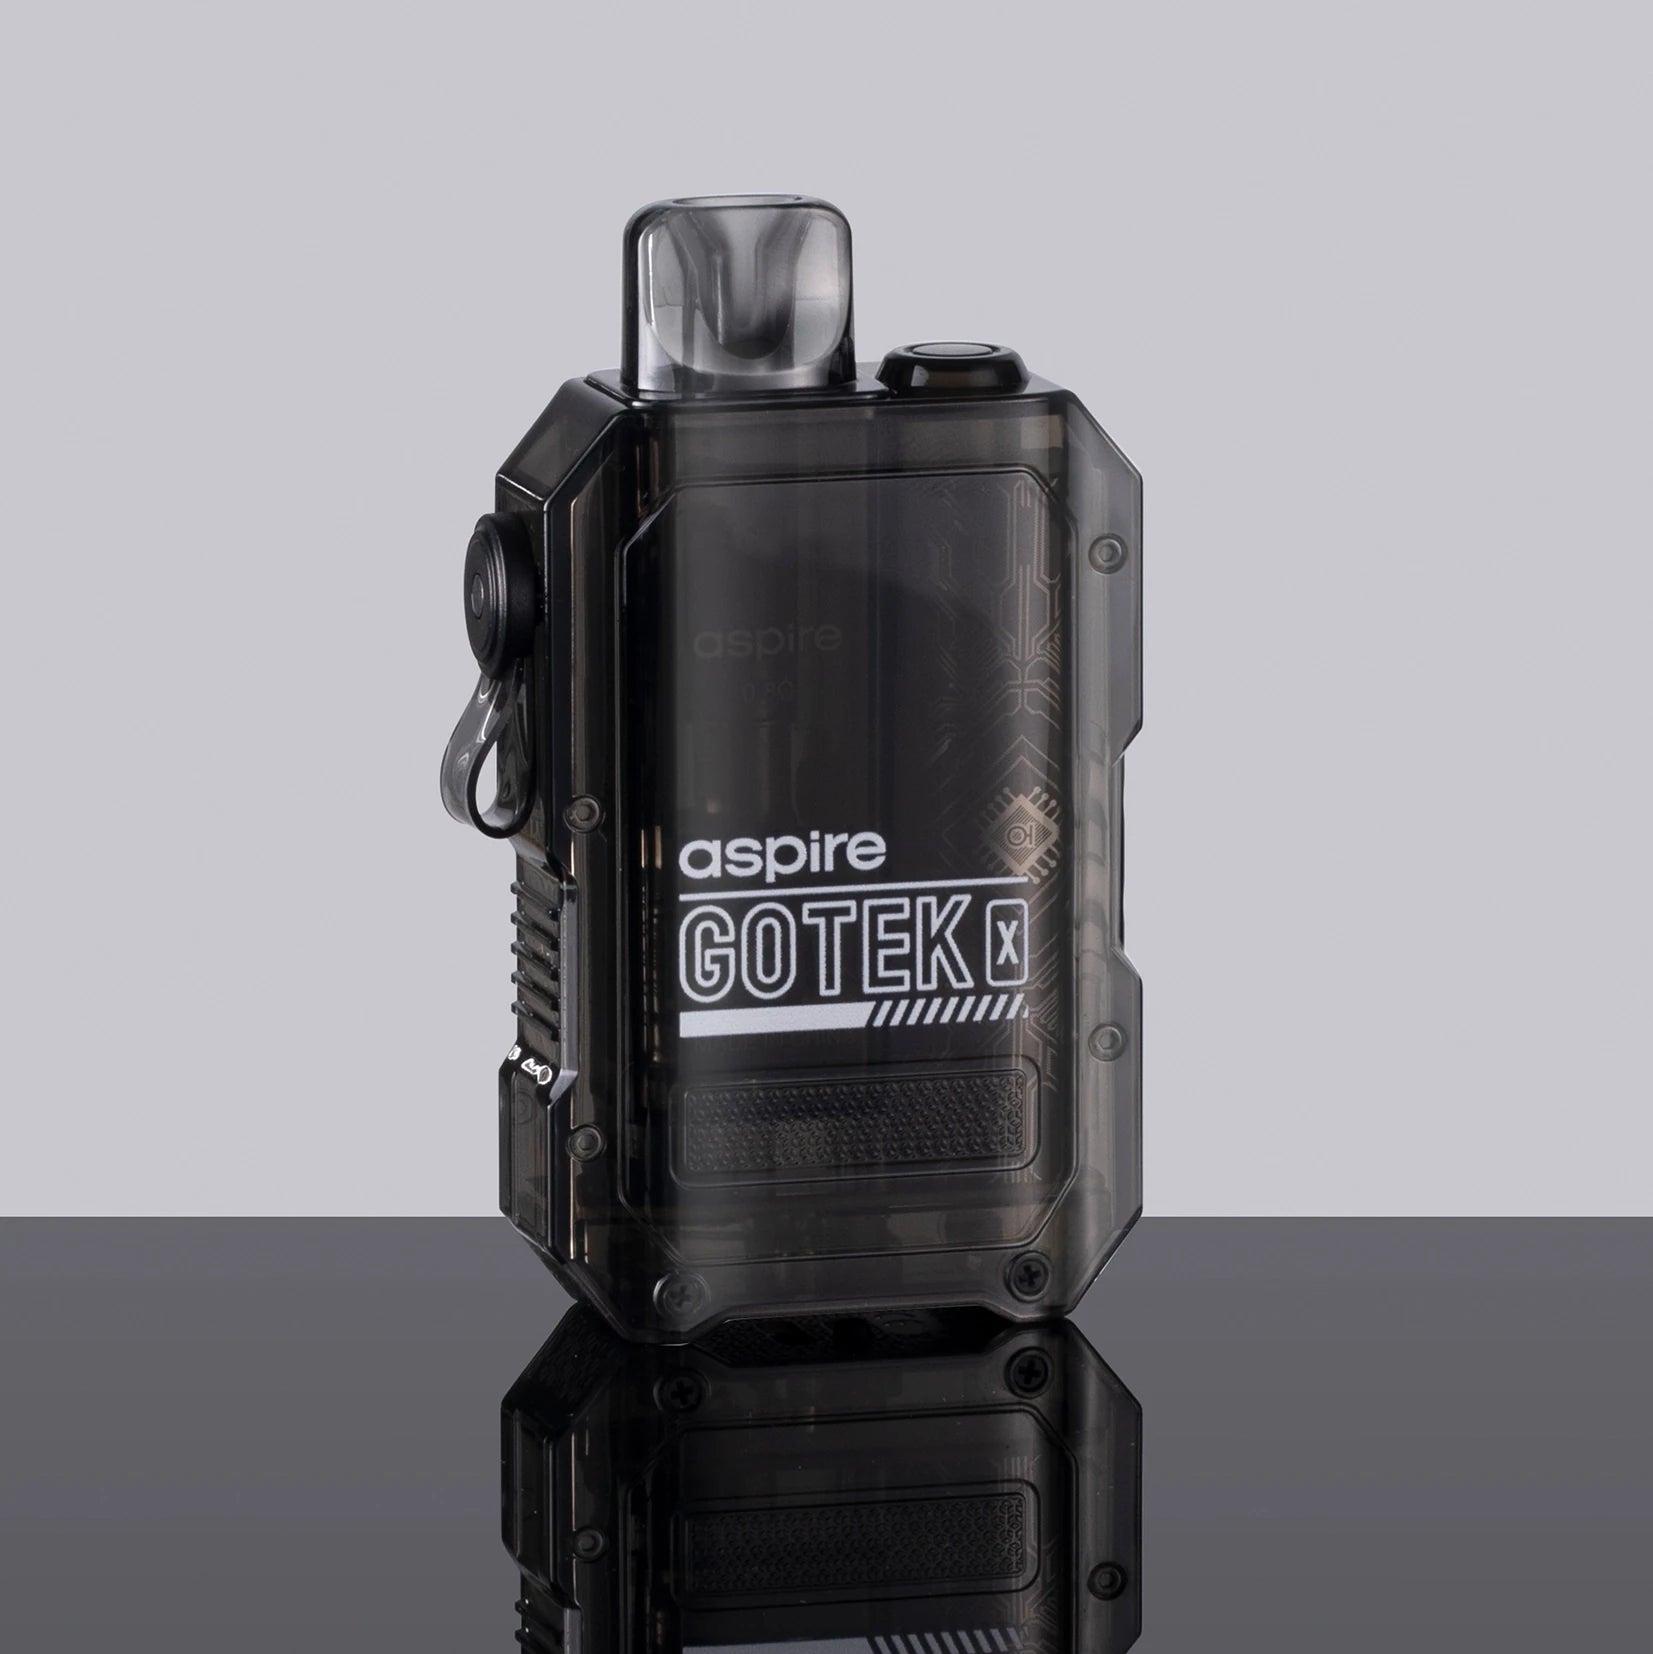 Learn more about the upcoming Aspire Gotek X Pod device, coming soon to UK Aspire Vendor. In this article we discuss technical specs, colour options, materials & more.